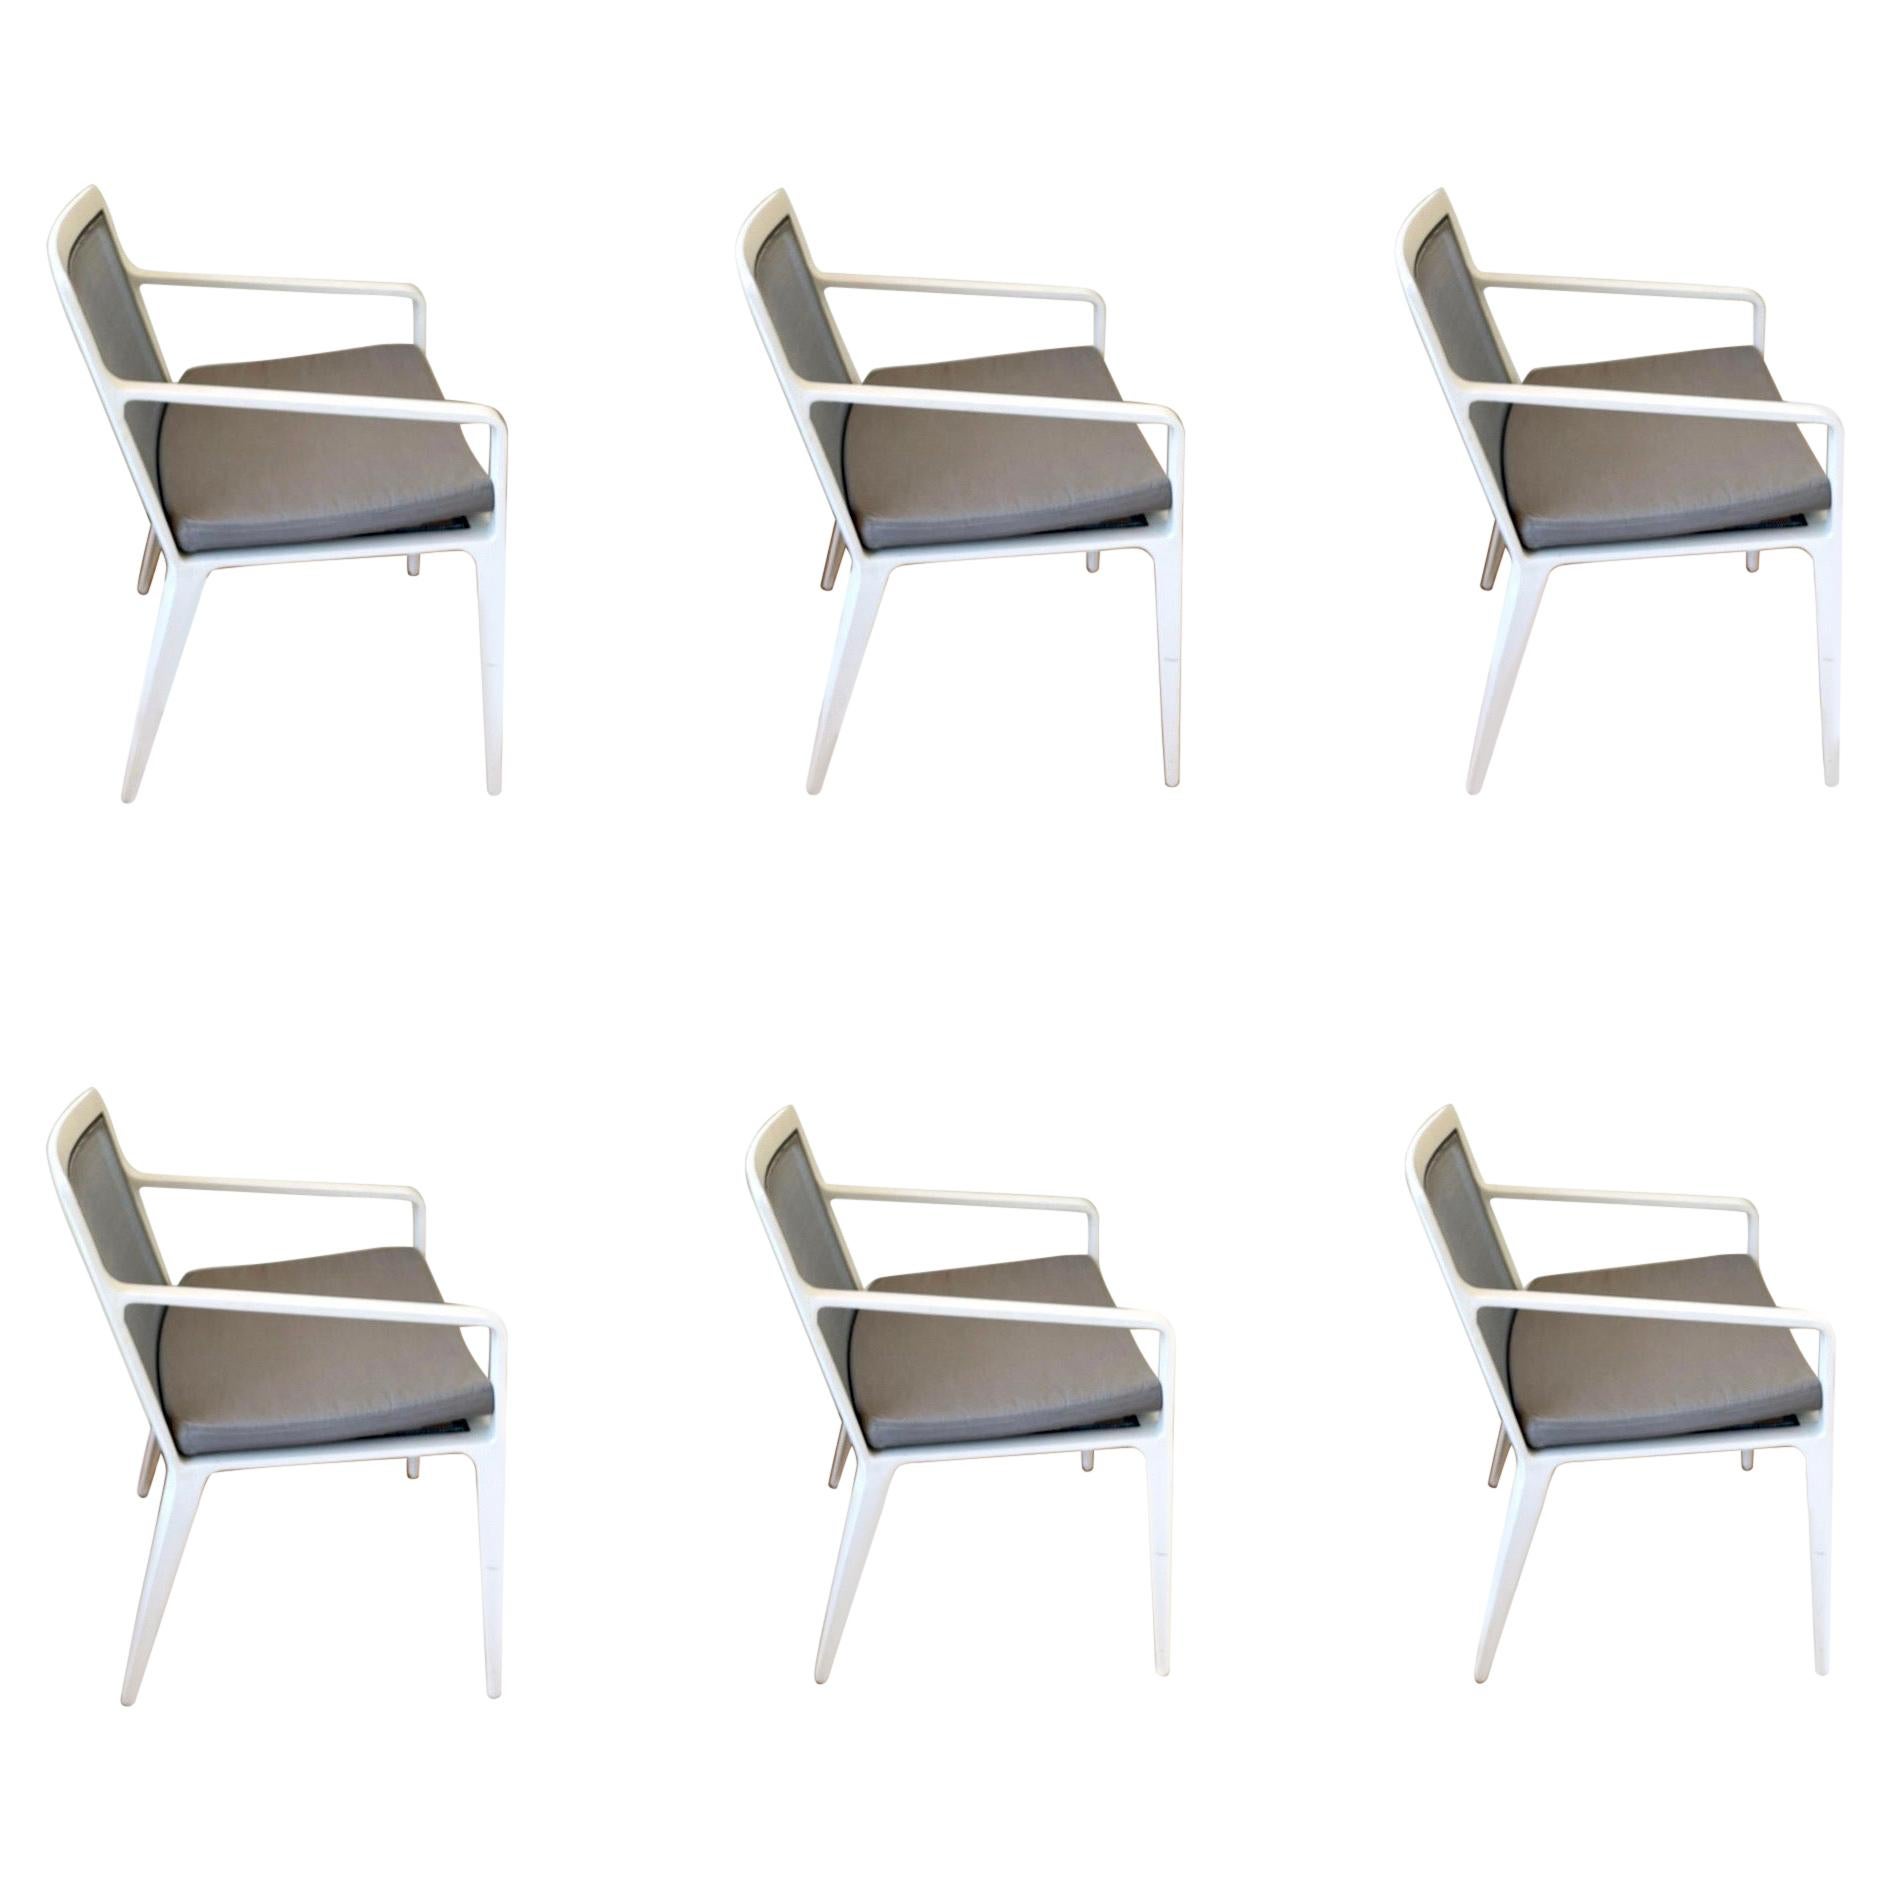 Patio Chairs Designed 